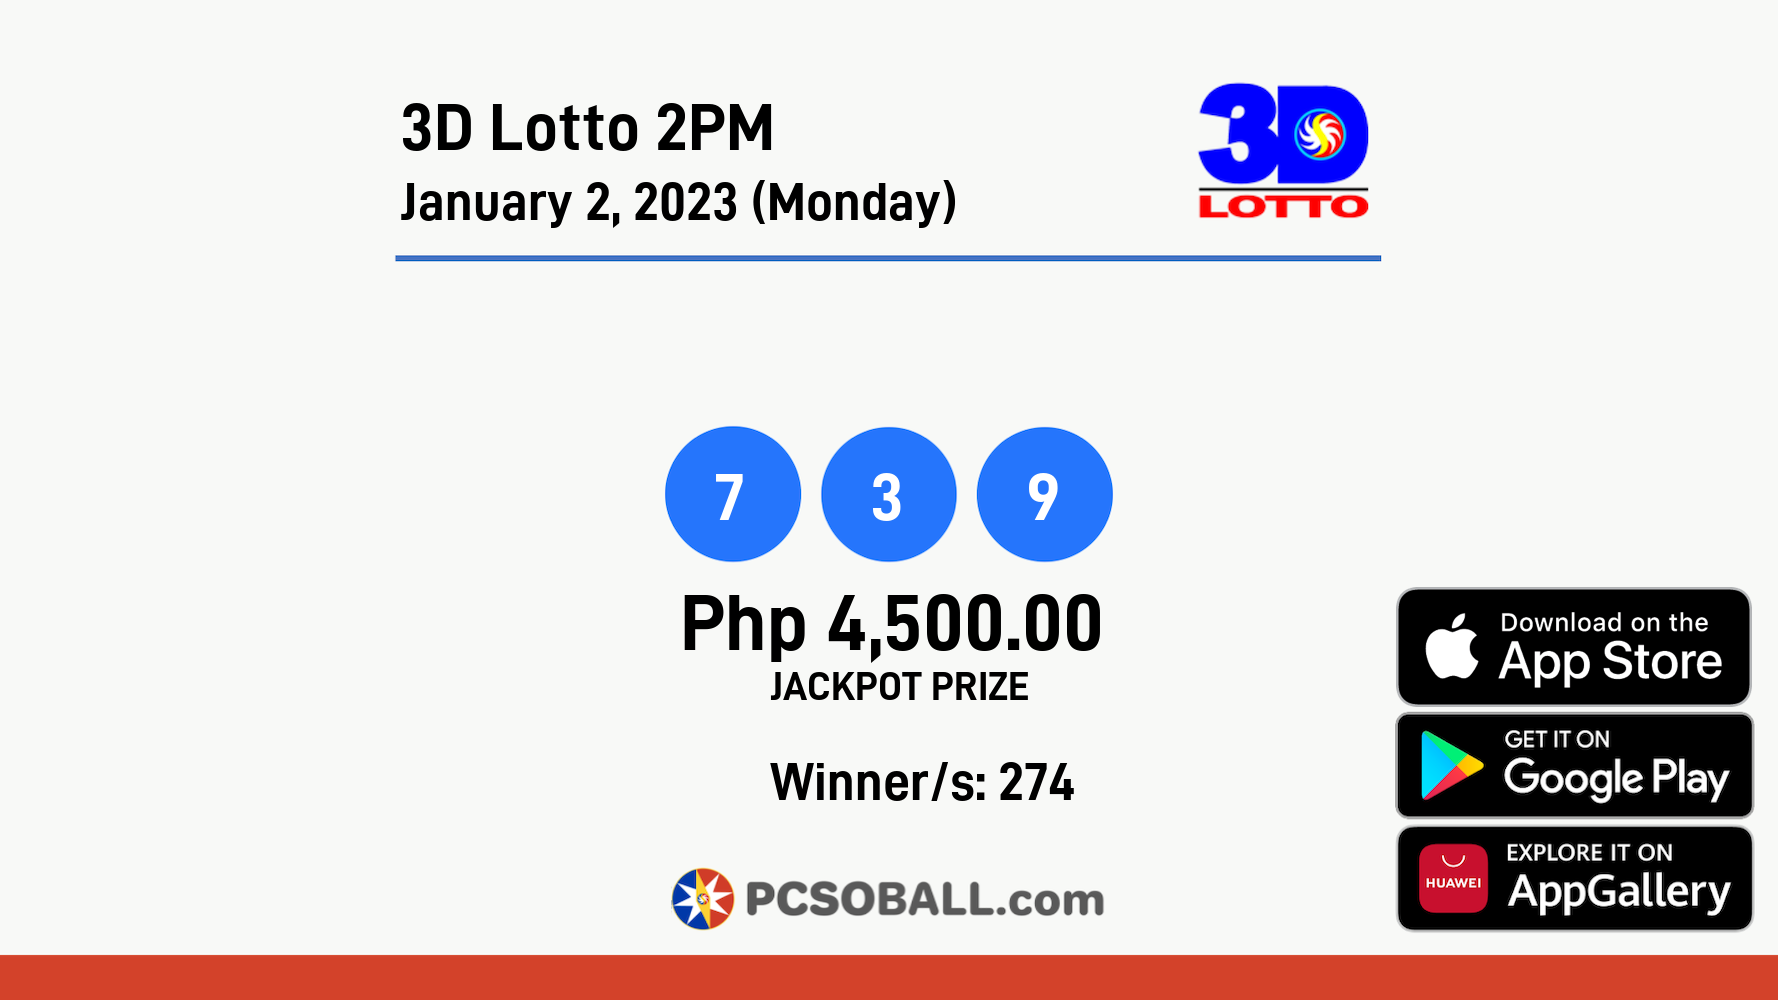 3D Lotto 2PM January 2, 2023 (Monday) Result